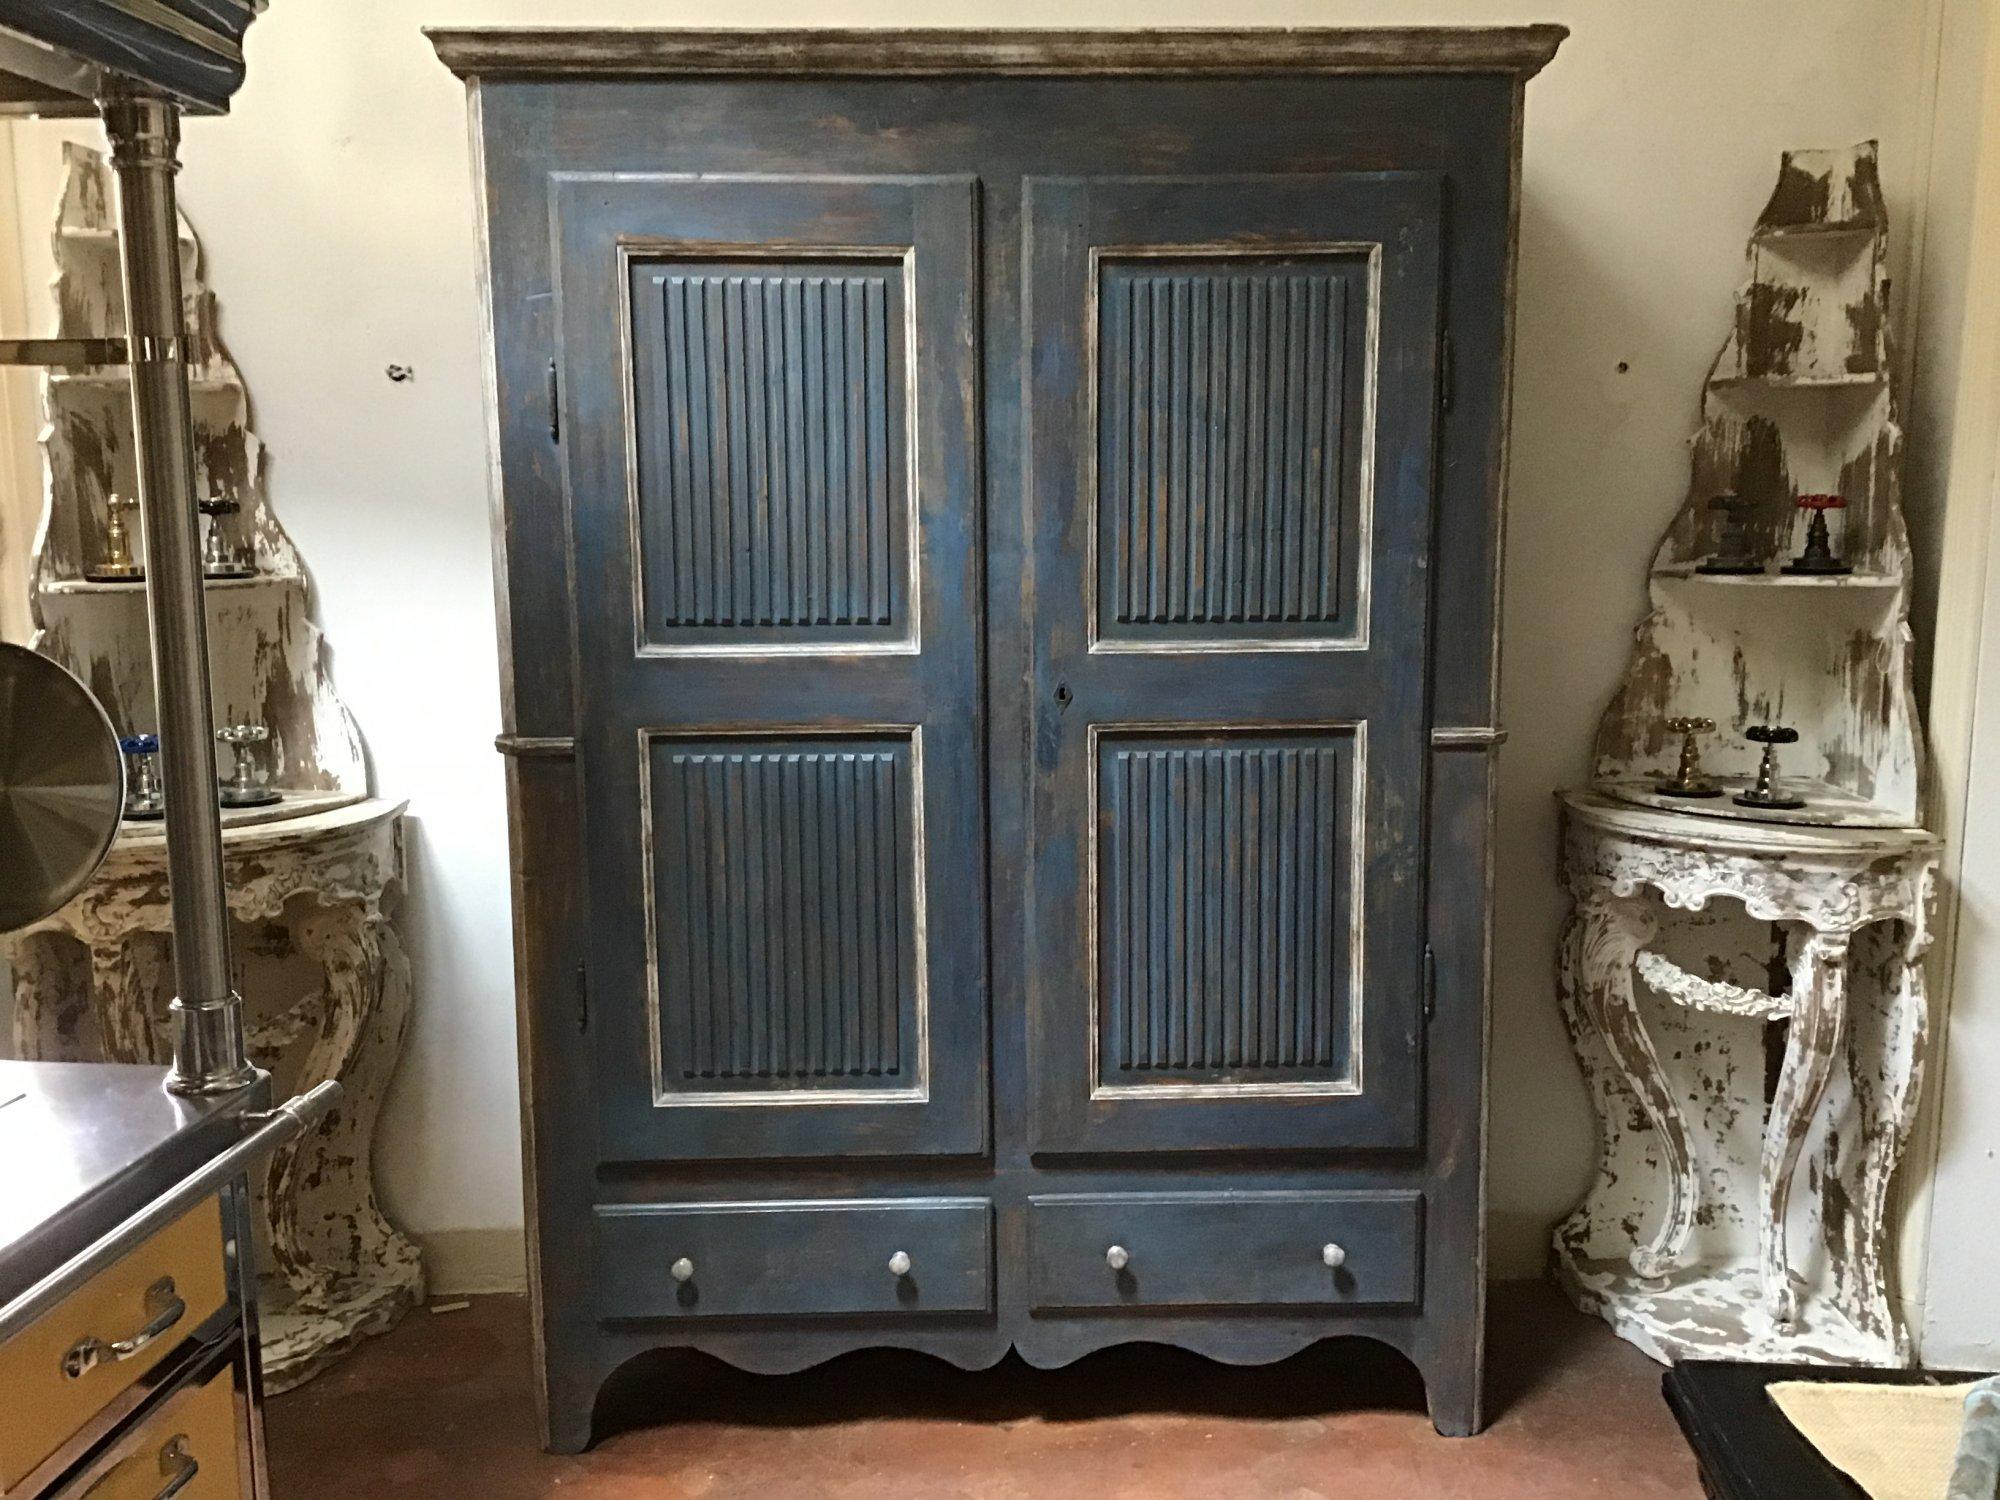 19th century Italian Piedmontese painted wood wardrobe with two shatters, 1890s.